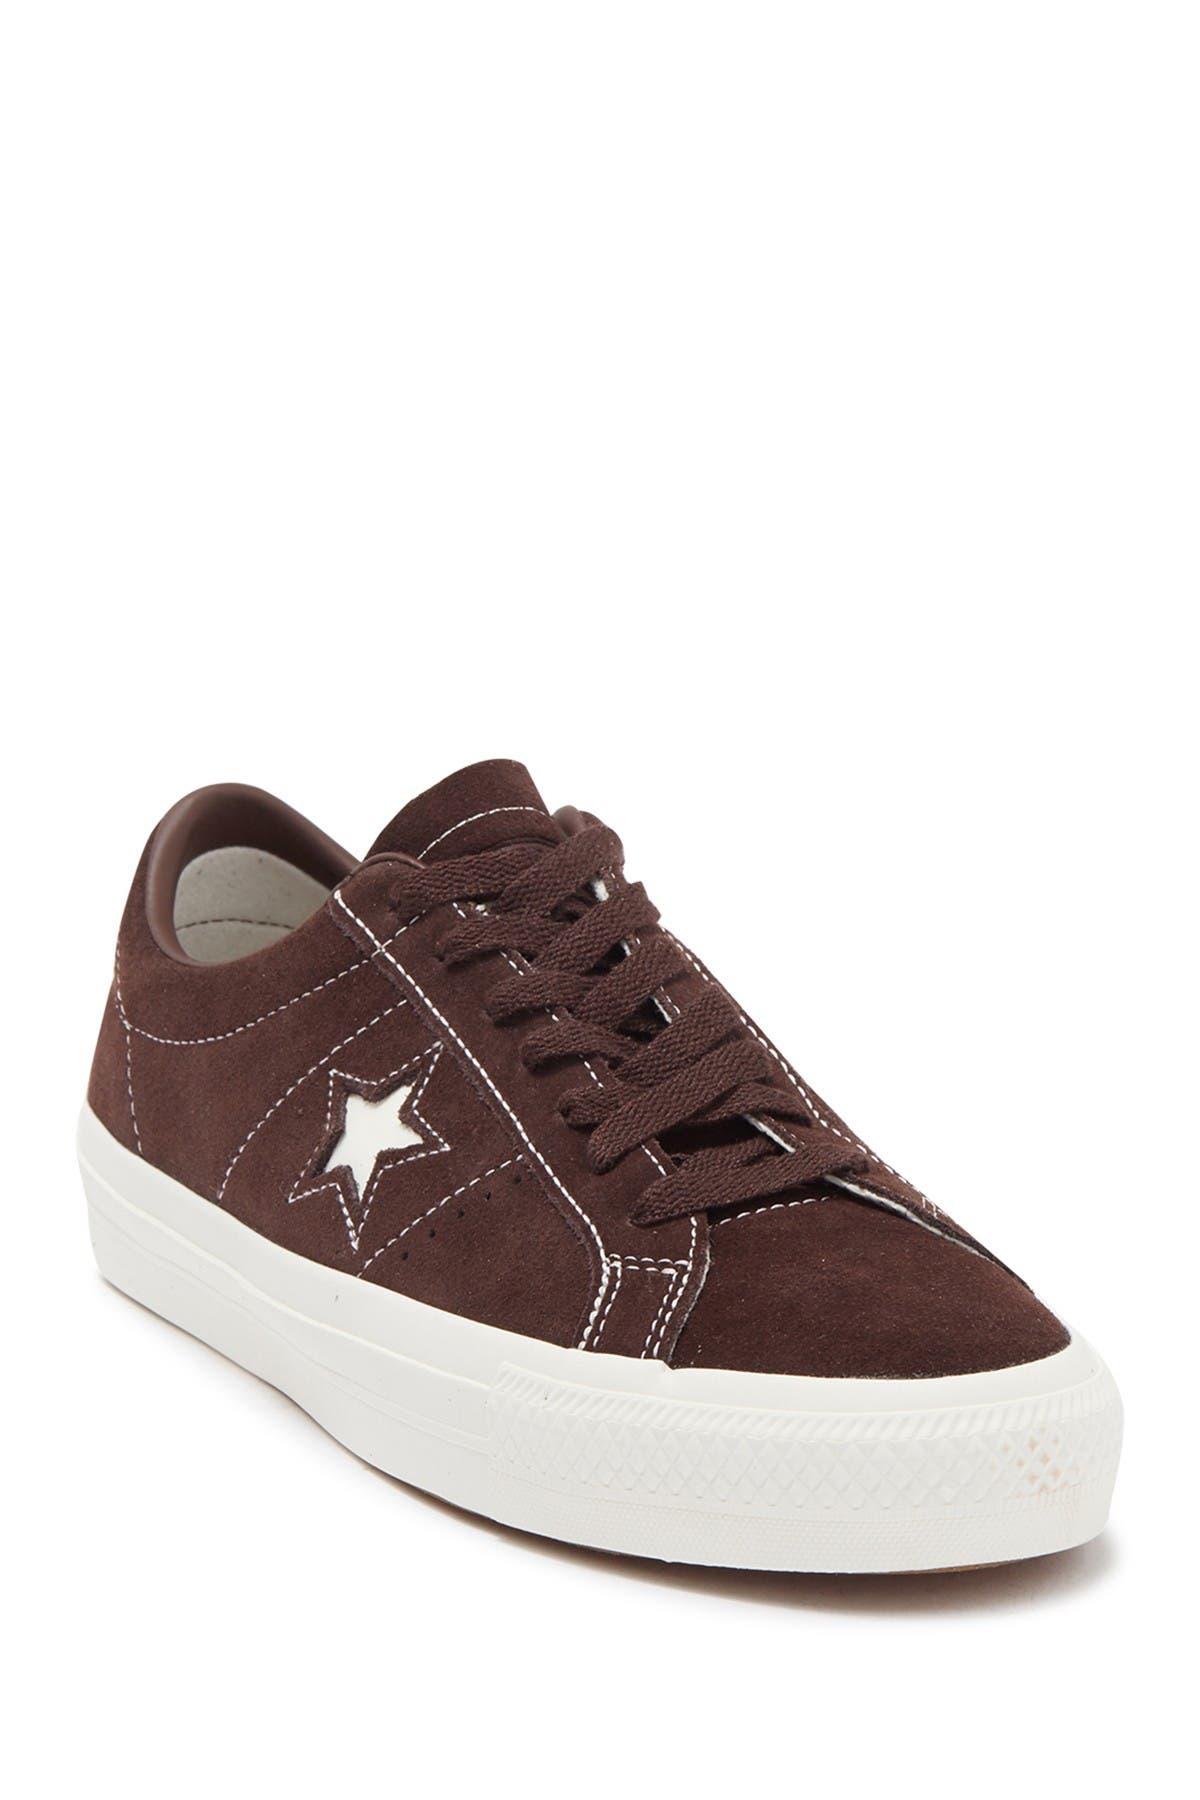 Converse One Star Pro Oxford Sneaker in Brown for Men | Lyst